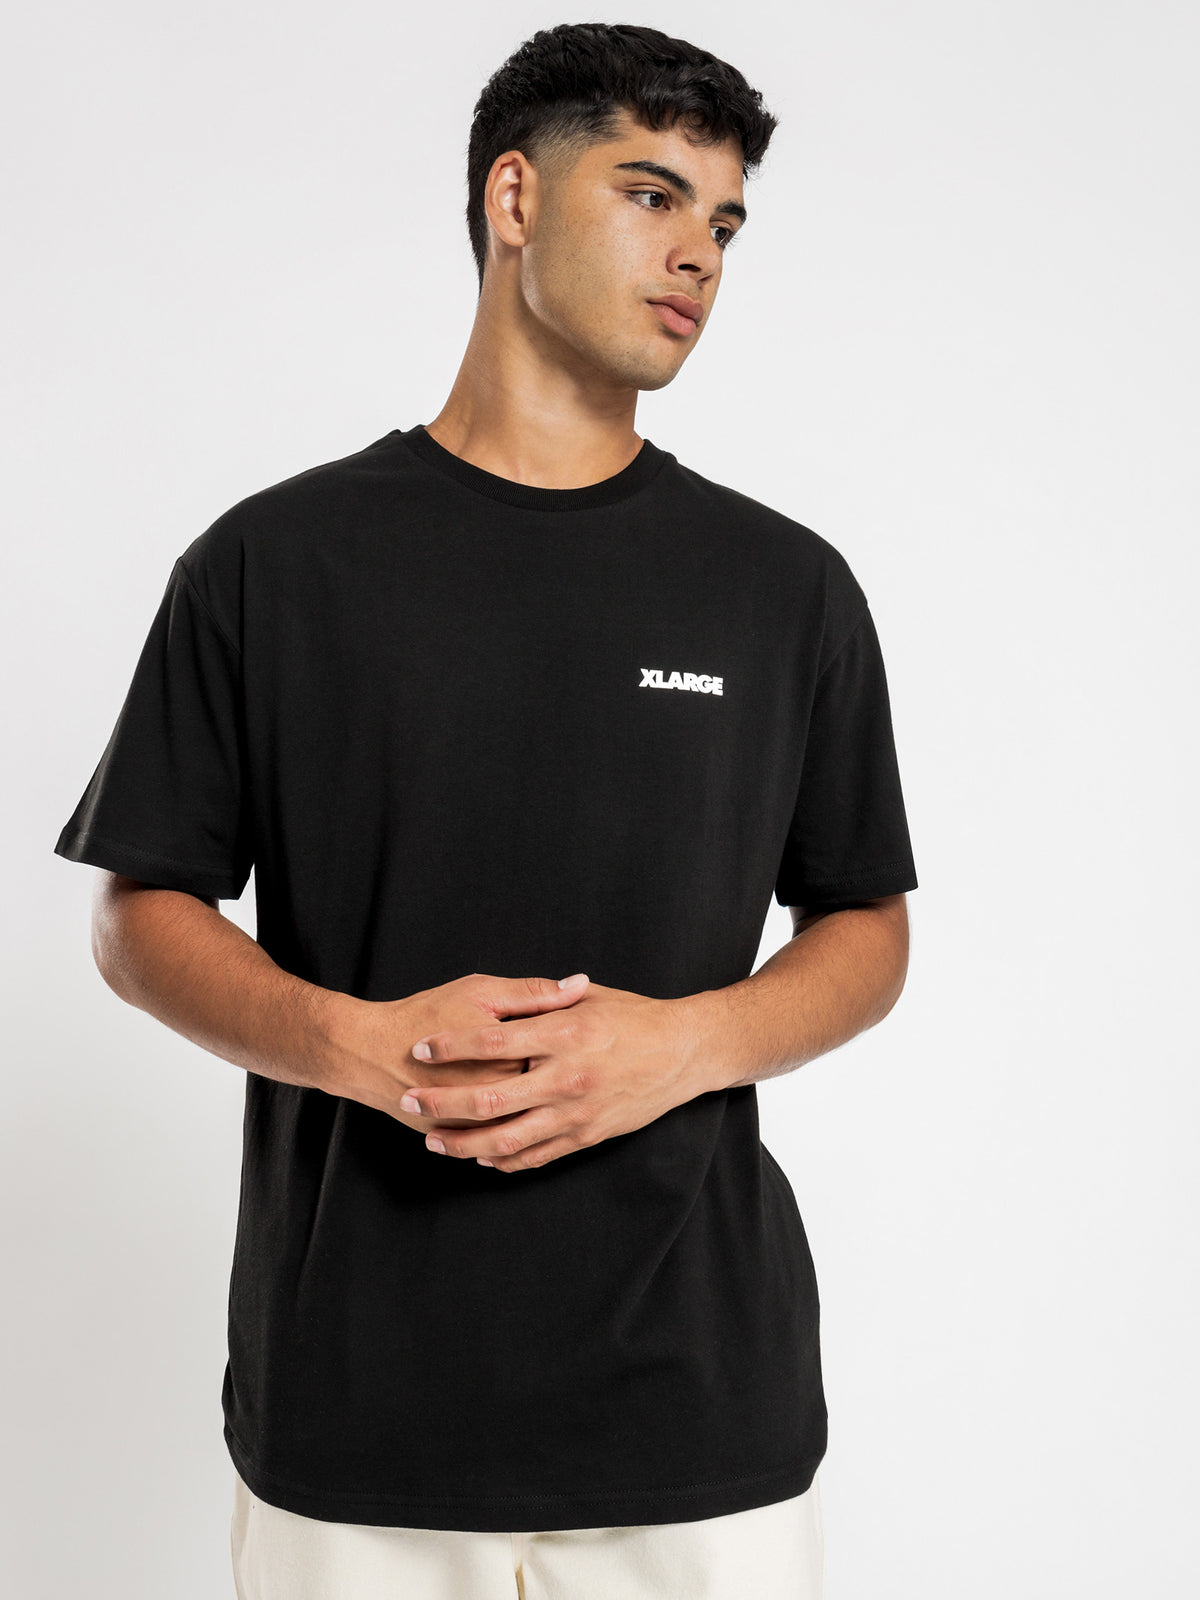 91 Text T-Shirt in Black